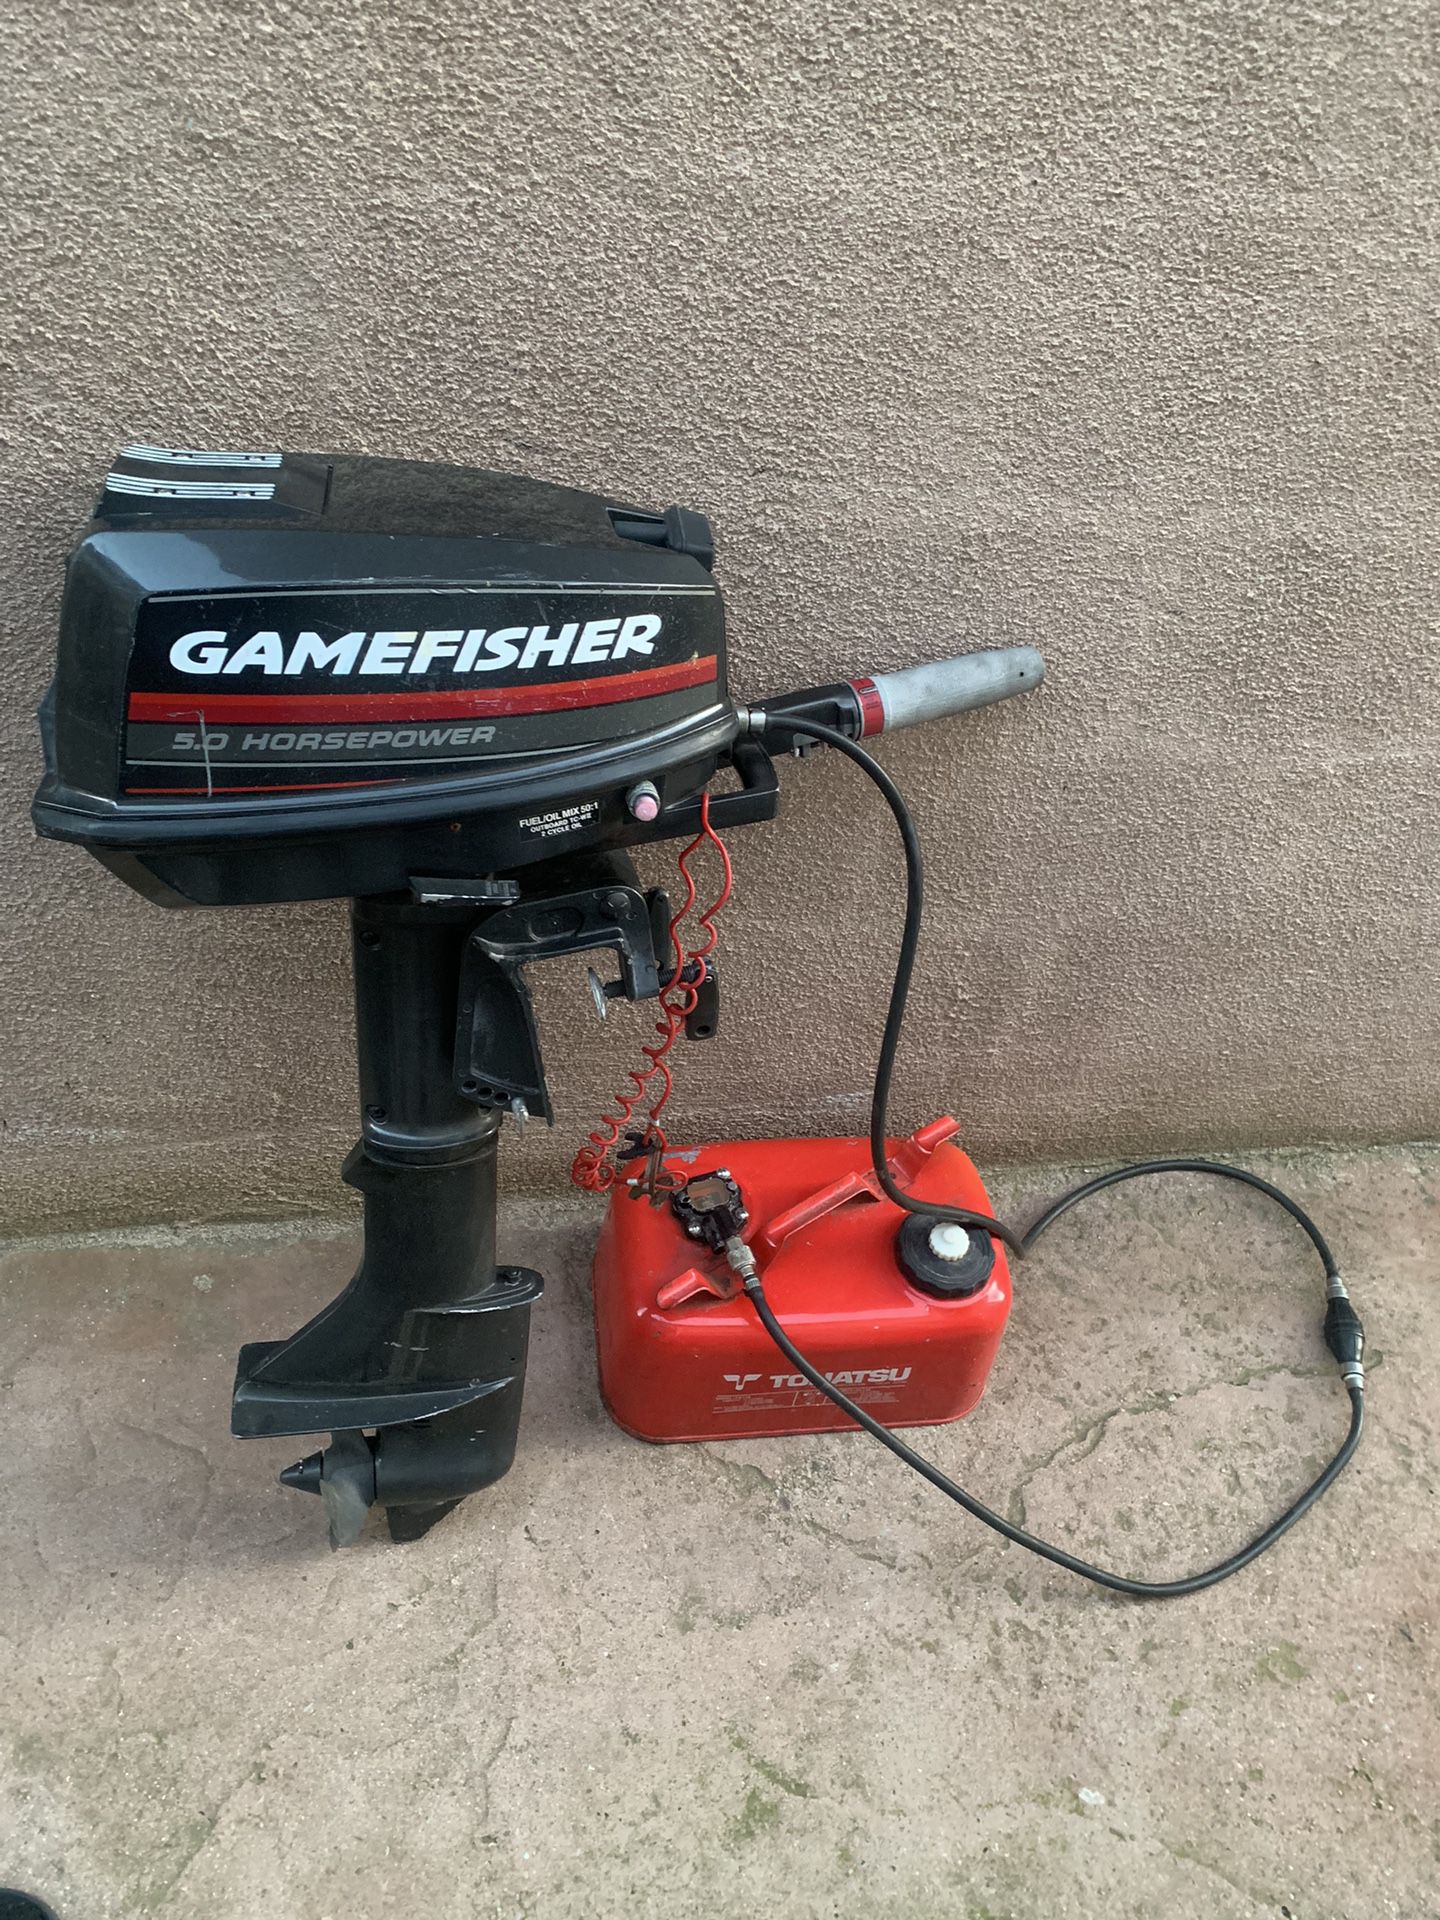 Game Fisher Outboard 5 Hp